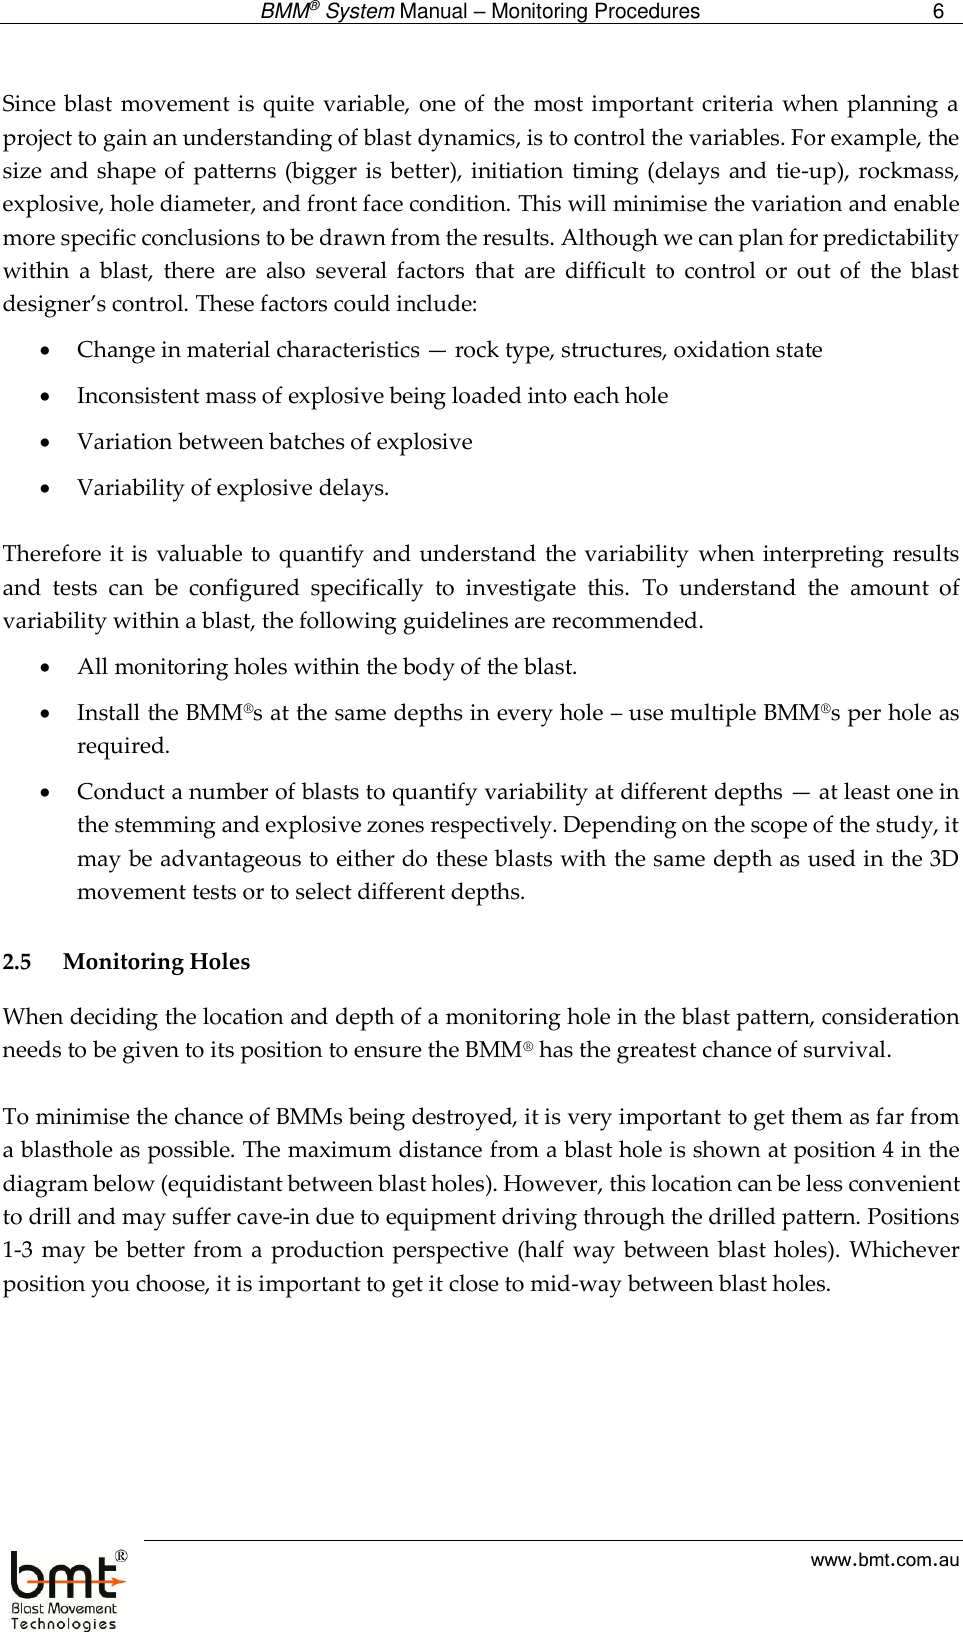  BMM® System Manual – Monitoring Procedures 6  www.bmt.com.au  Since blast  movement is quite variable, one of the  most important criteria when planning a project to gain an understanding of blast dynamics, is to control the variables. For example, the size and shape of  patterns (bigger  is better), initiation  timing  (delays and tie-up), rockmass, explosive, hole diameter, and front face condition. This will minimise the variation and enable more specific conclusions to be drawn from the results. Although we can plan for predictability within  a  blast,  there  are  also  several  factors  that  are  difficult  to  control  or  out  of  the  blast designer’s control. These factors could include:  Change in material characteristics — rock type, structures, oxidation state  Inconsistent mass of explosive being loaded into each hole  Variation between batches of explosive  Variability of explosive delays.  Therefore it is  valuable to quantify and understand the variability when interpreting results and  tests  can  be  configured  specifically  to  investigate  this.  To  understand  the  amount  of variability within a blast, the following guidelines are recommended.  All monitoring holes within the body of the blast.  Install the BMM®s at the same depths in every hole – use multiple BMM®s per hole as required.  Conduct a number of blasts to quantify variability at different depths — at least one in the stemming and explosive zones respectively. Depending on the scope of the study, it may be advantageous to either do these blasts with the same depth as used in the 3D movement tests or to select different depths.   2.5 Monitoring Holes When deciding the location and depth of a monitoring hole in the blast pattern, consideration needs to be given to its position to ensure the BMM® has the greatest chance of survival.  To minimise the chance of BMMs being destroyed, it is very important to get them as far from a blasthole as possible. The maximum distance from a blast hole is shown at position 4 in the diagram below (equidistant between blast holes). However, this location can be less convenient to drill and may suffer cave-in due to equipment driving through the drilled pattern. Positions 1-3 may be  better from a  production perspective (half way between blast holes). Whichever position you choose, it is important to get it close to mid-way between blast holes.  